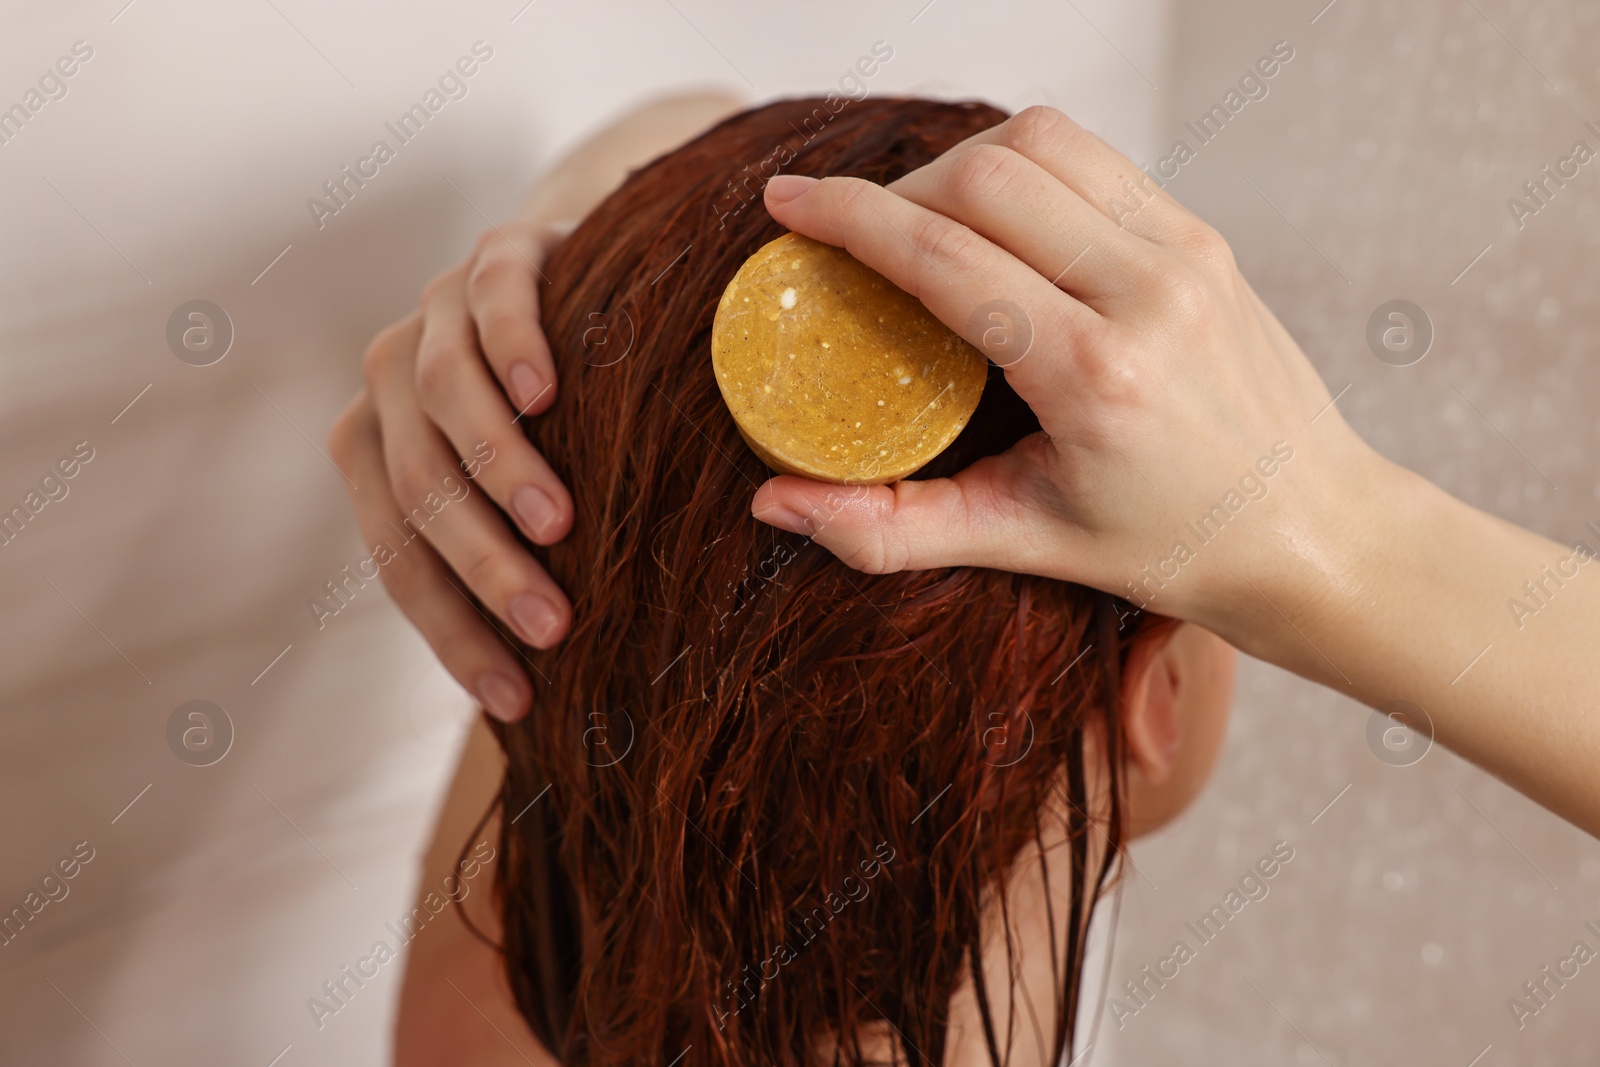 Photo of Young woman washing her hair with solid shampoo bar in shower, back view